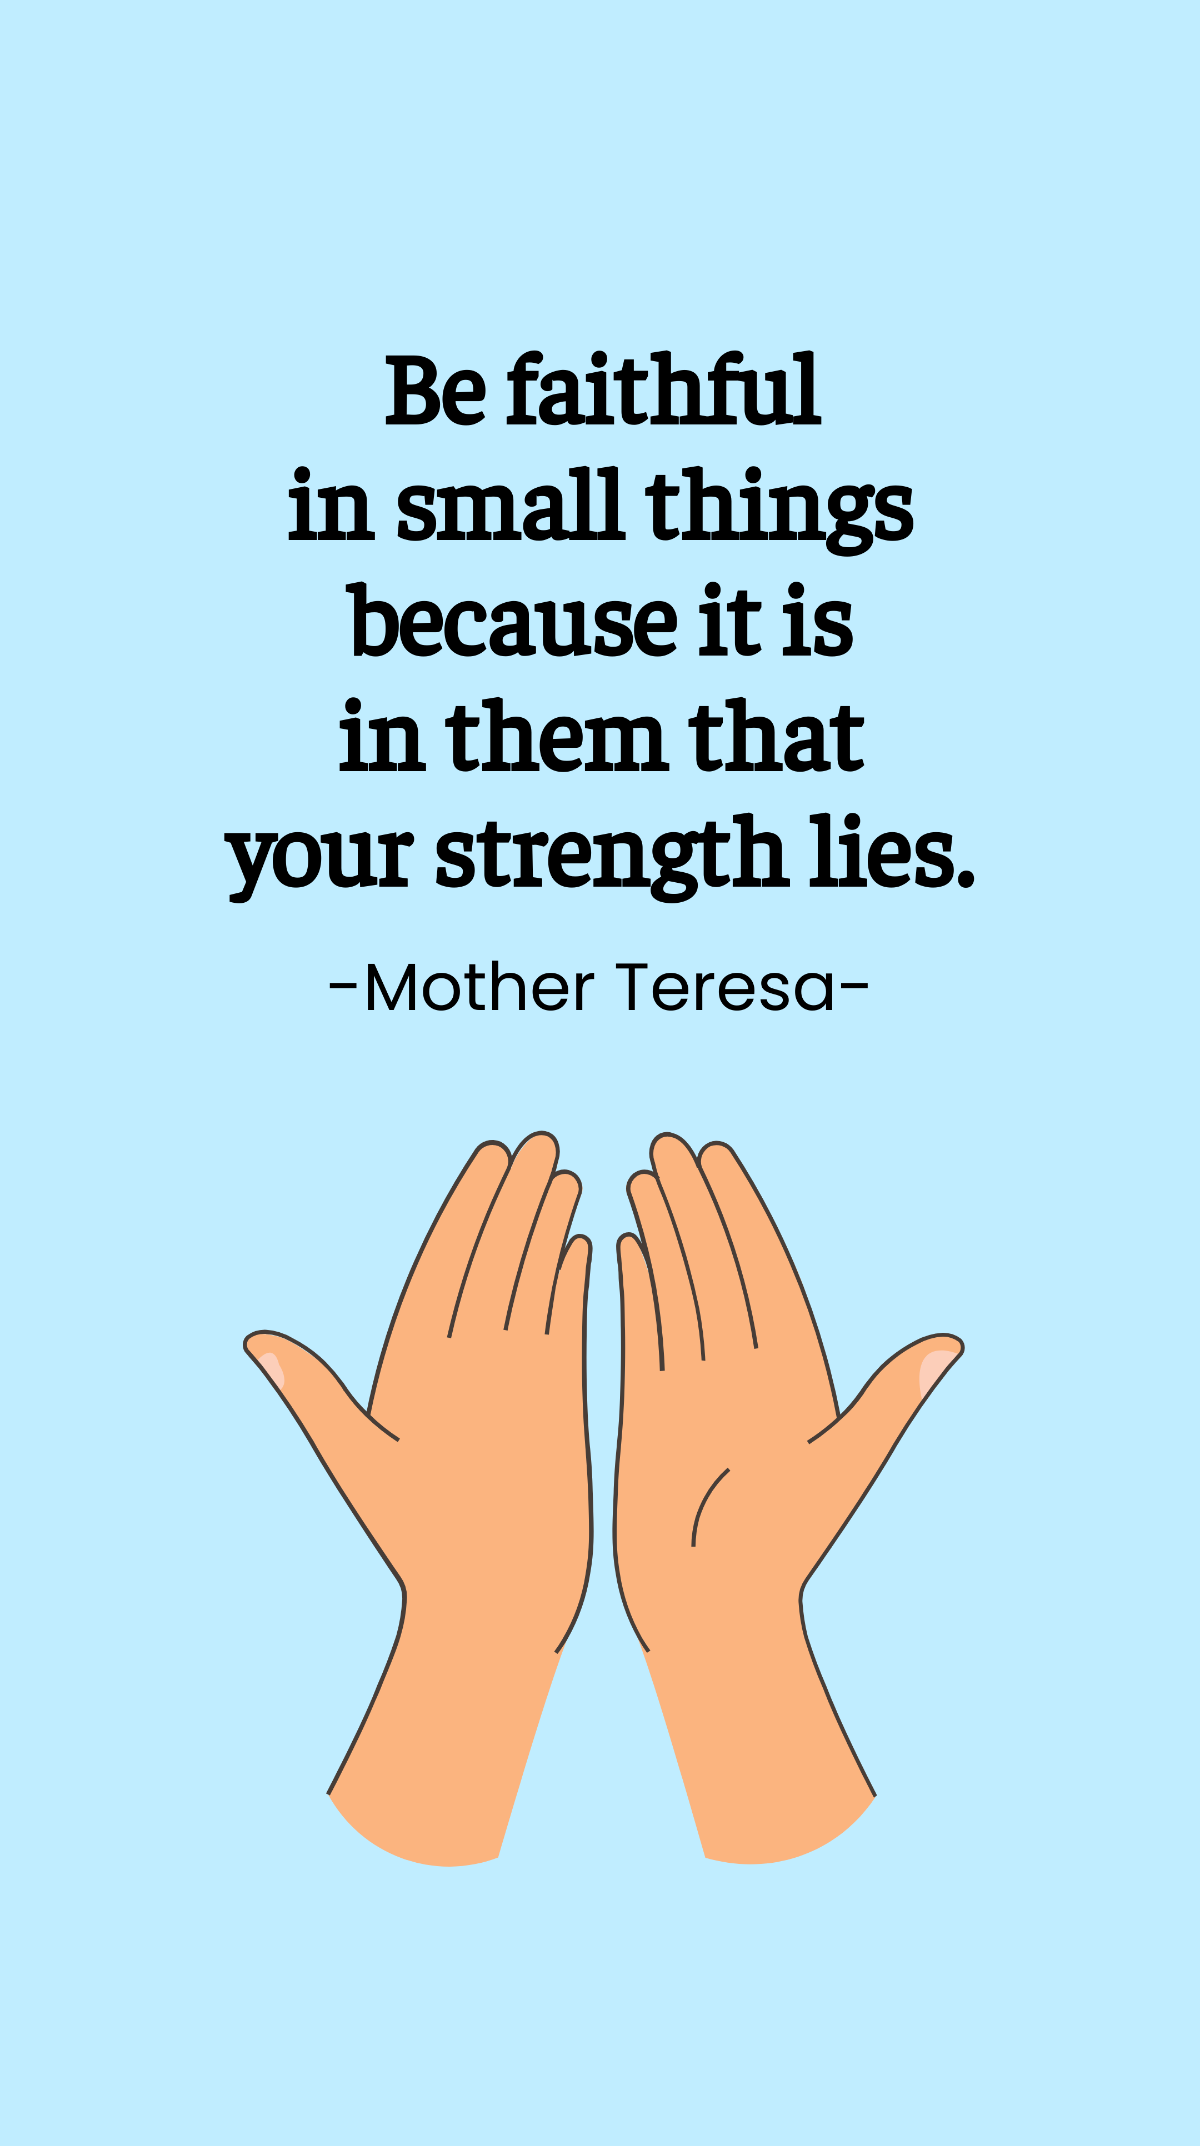 Mother Teresa - Be faithful in small things because it is in them that your strength lies. Template